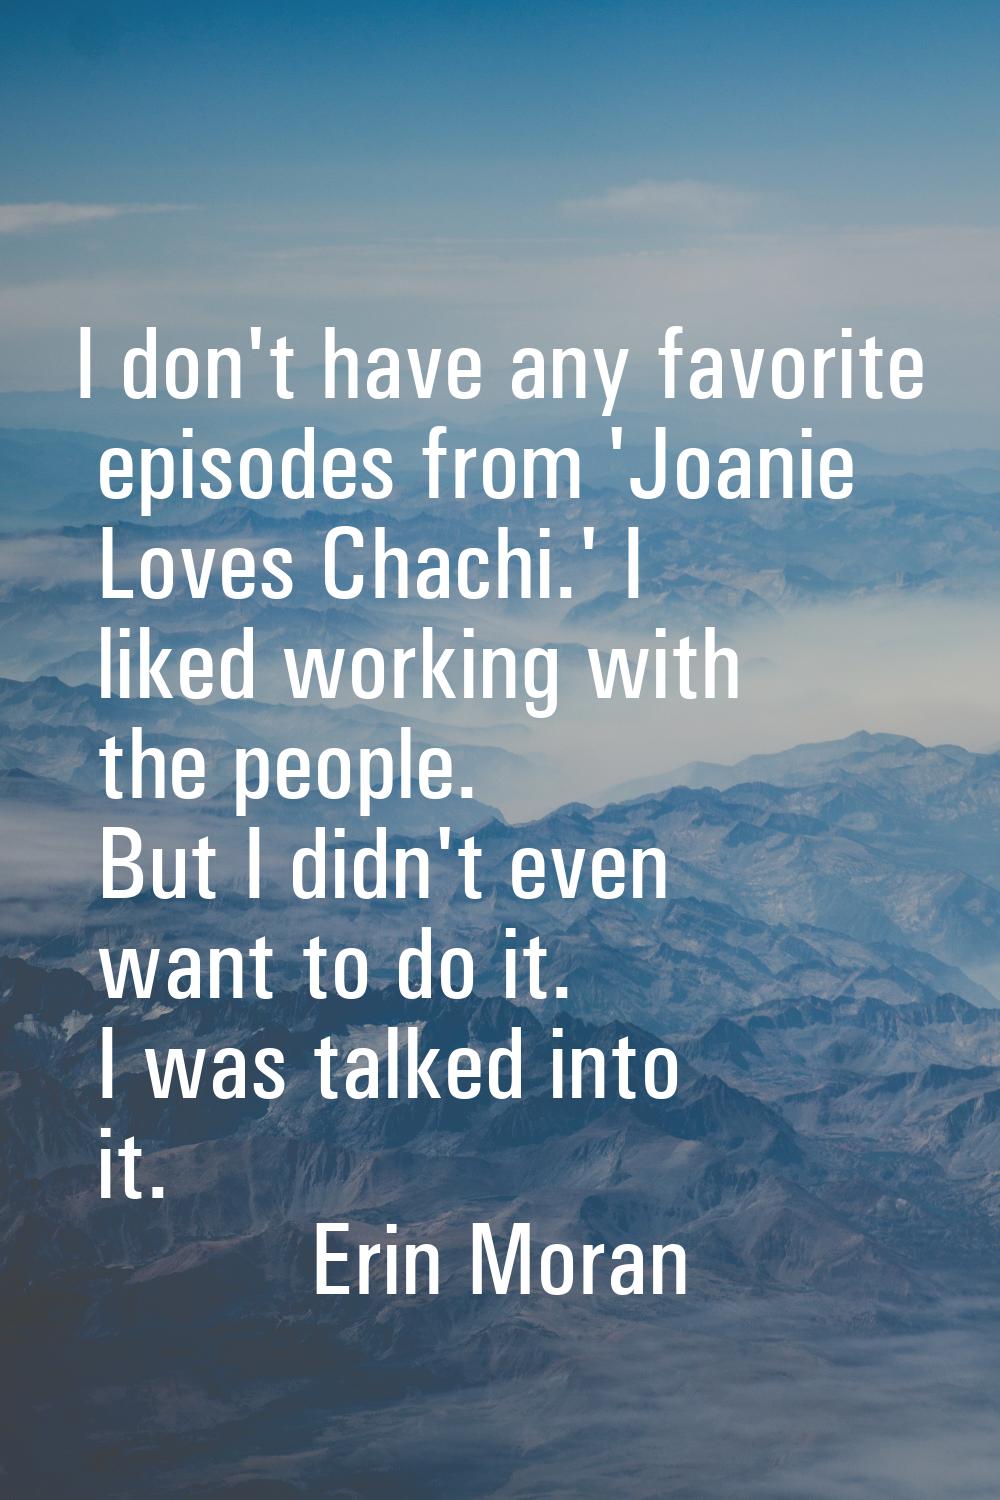 I don't have any favorite episodes from 'Joanie Loves Chachi.' I liked working with the people. But